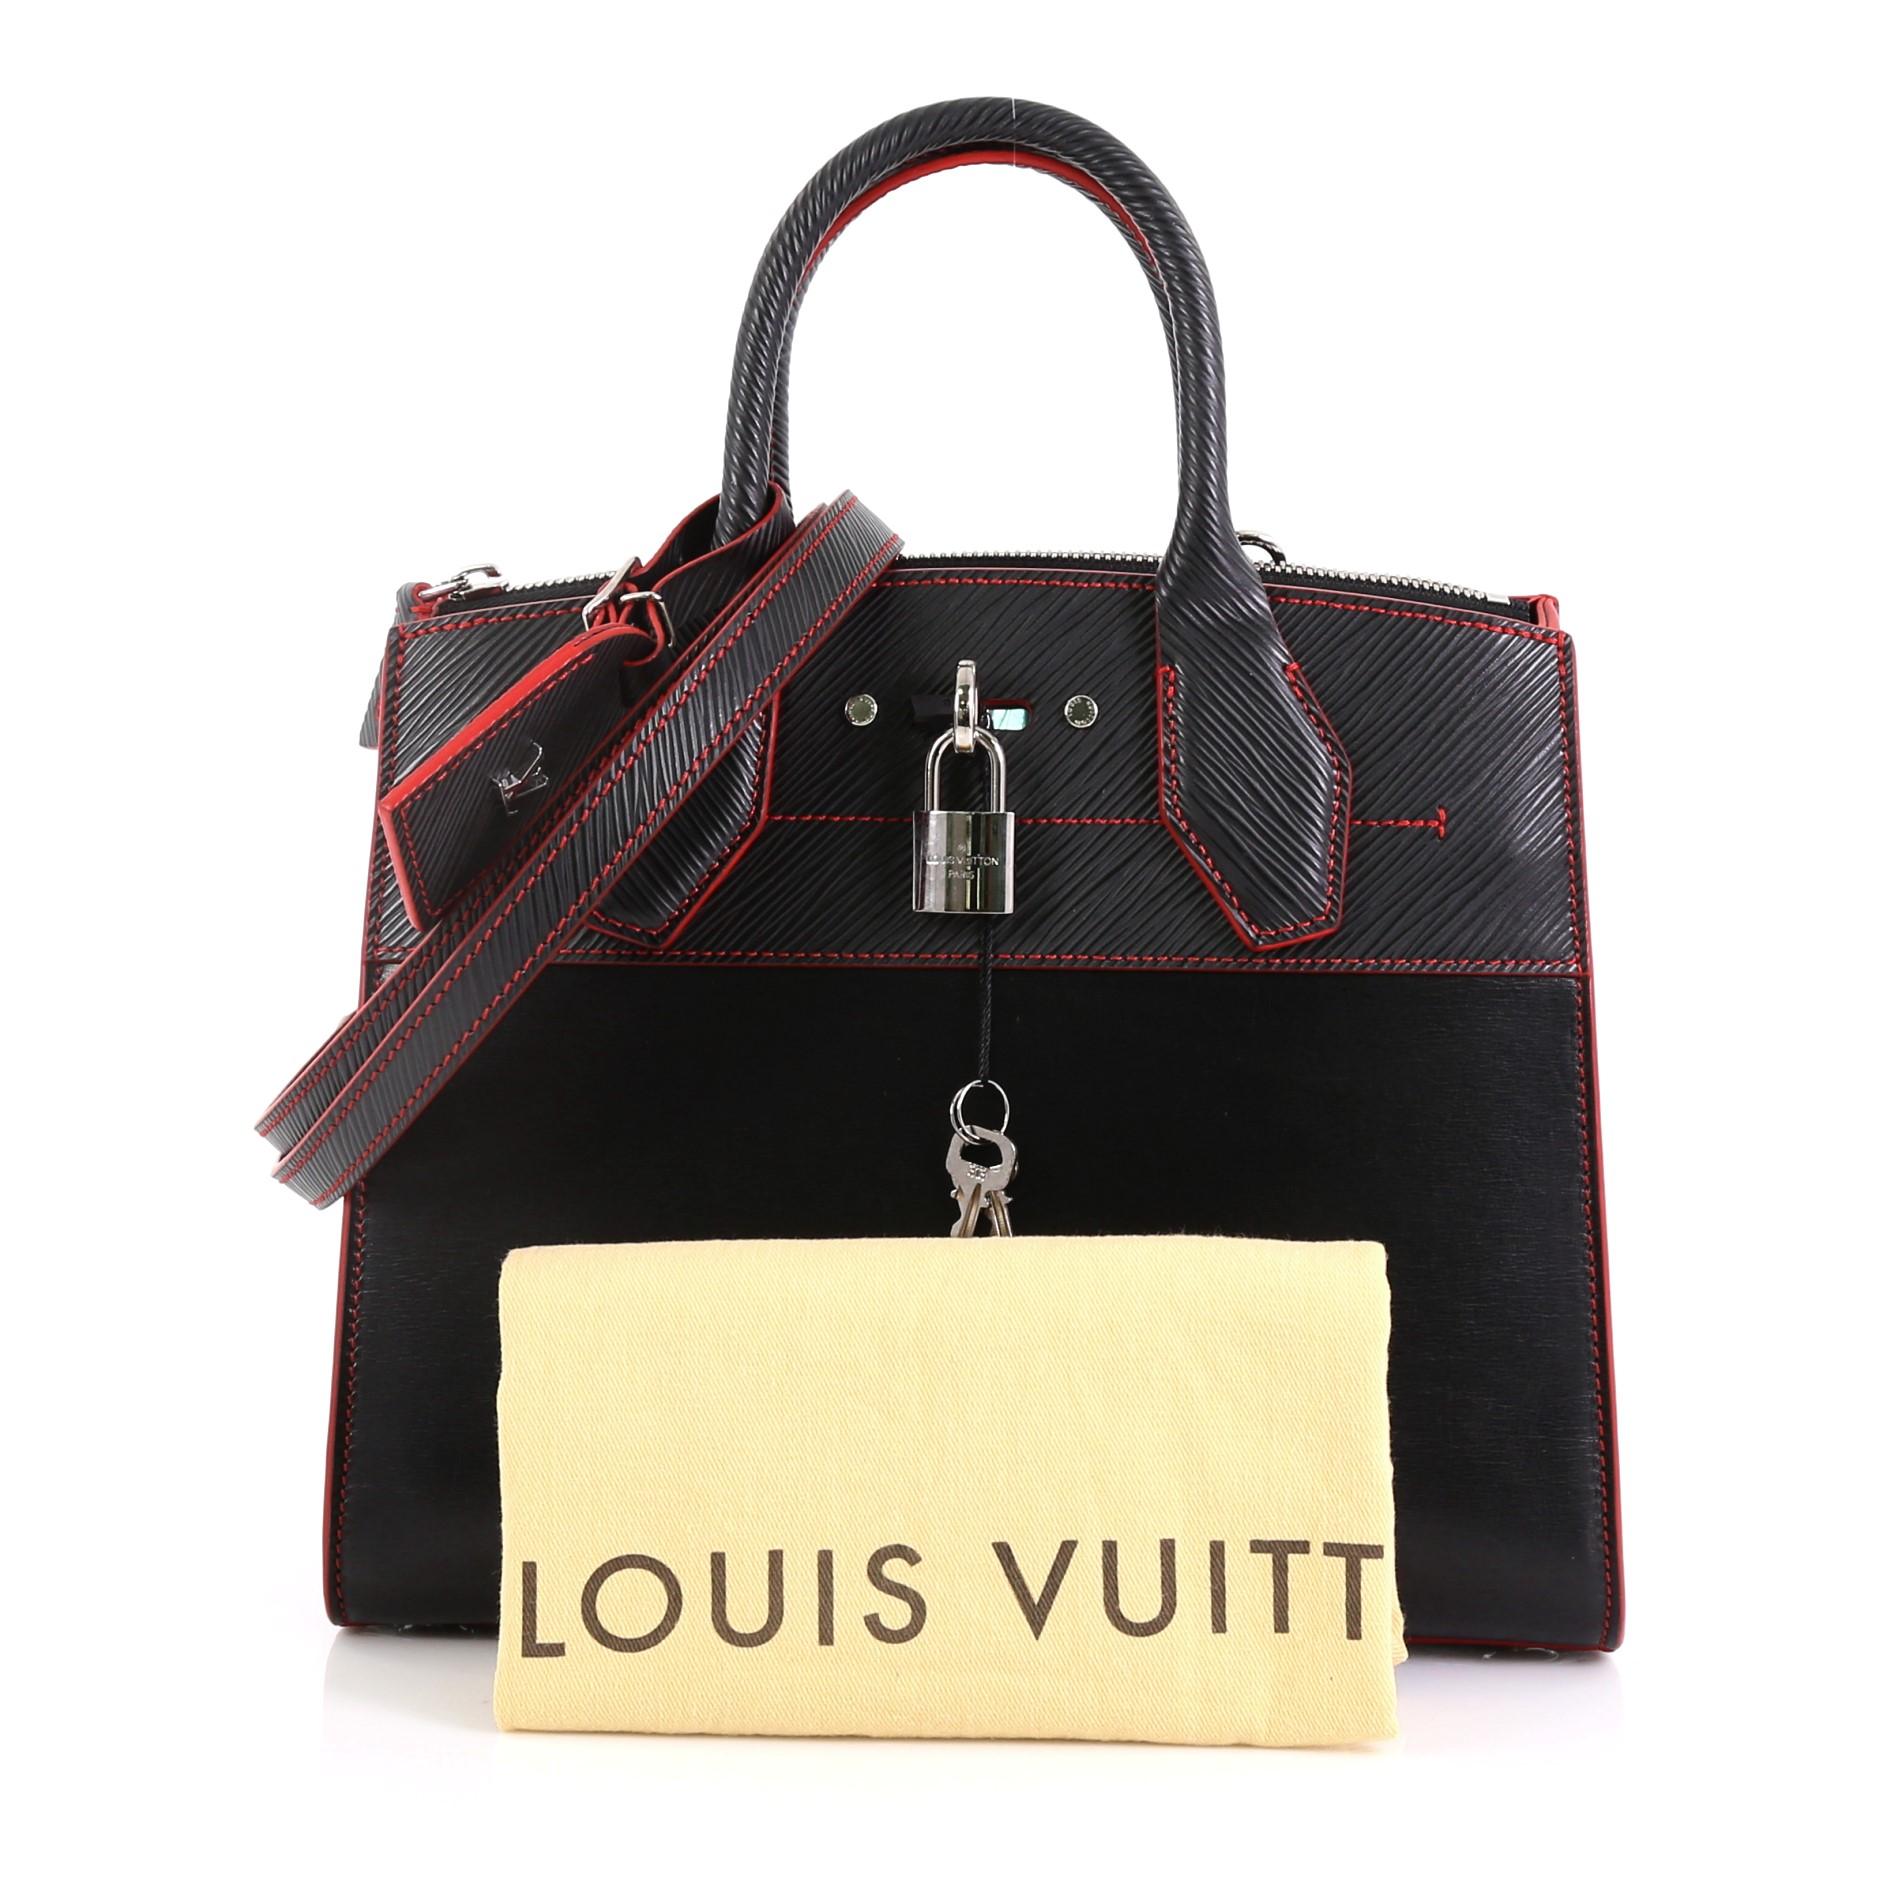 This Louis Vuitton City Steamer Handbag Smooth Calfskin with Epi Leather PM, crafted from black calfskin leather and epi leather, features dual rolled handles, front central lock with LV stamped logo, and silver-tone hardware. Its hook closure opens